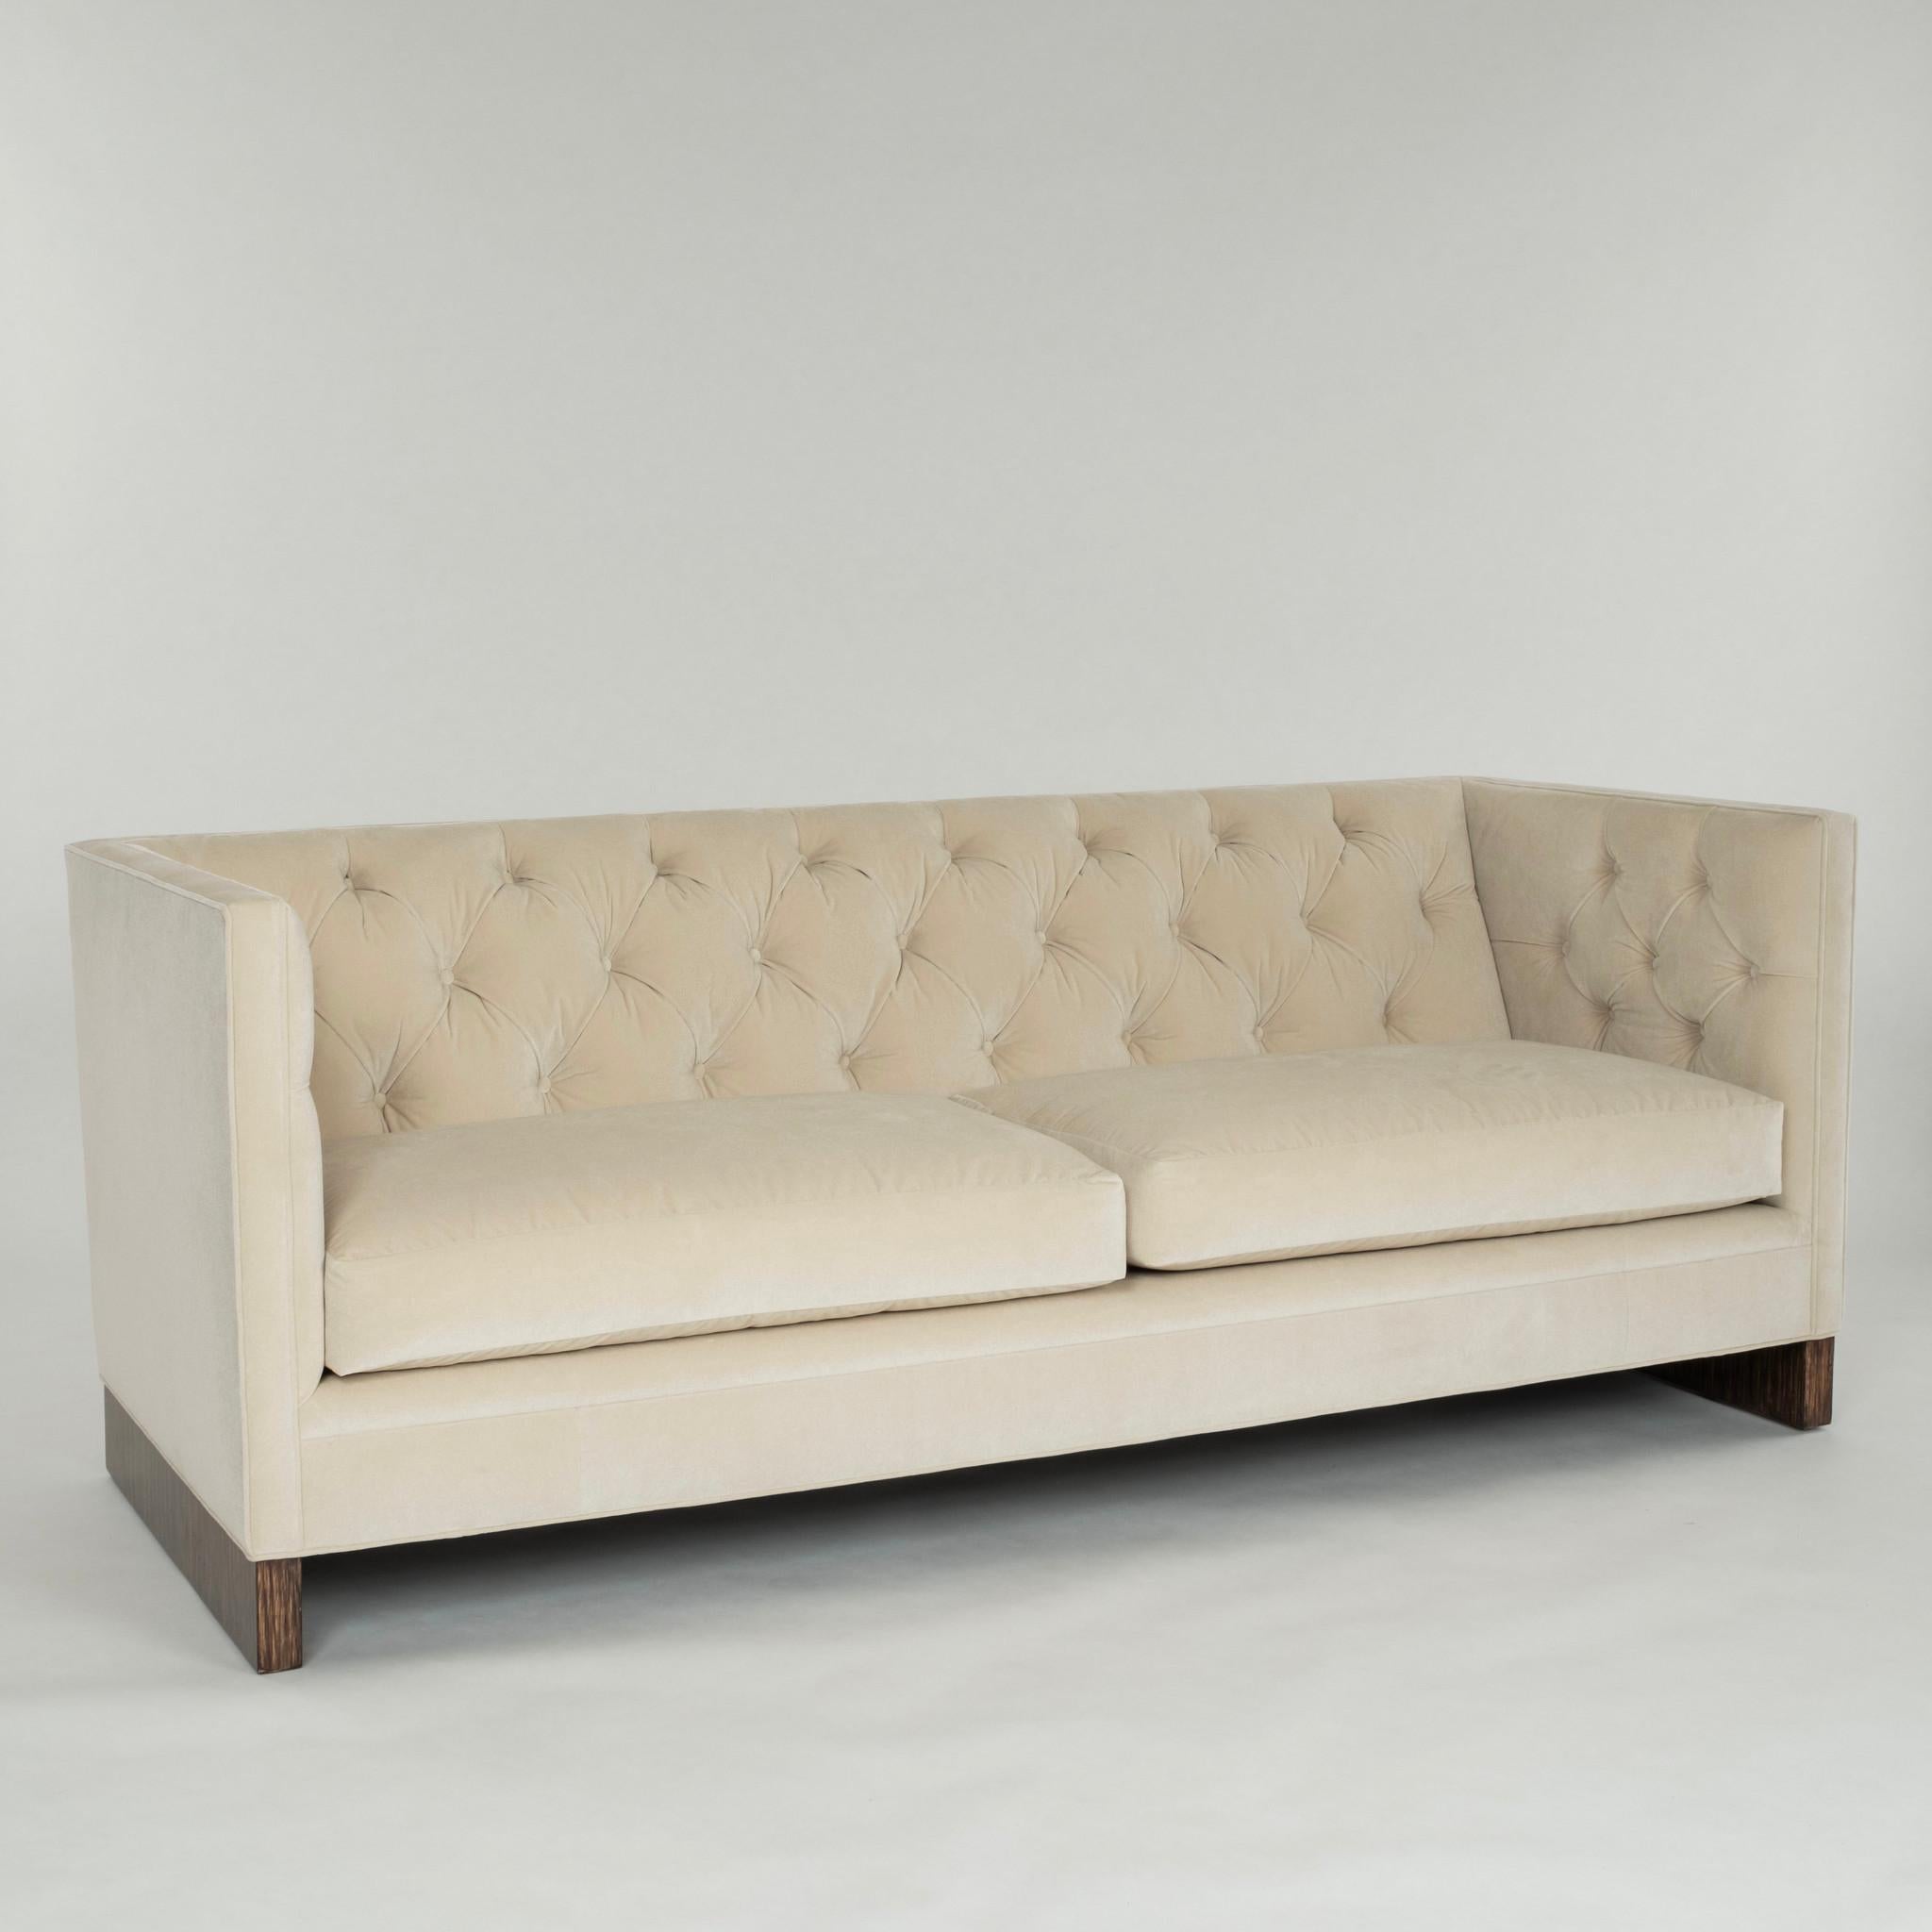 20th Century tuxedo sofa newly upholstered, featuring beige ecru performance fabric,  button tufting, feather down wrapped spring coil seat cushions, supported by Macassar Ebony wood.